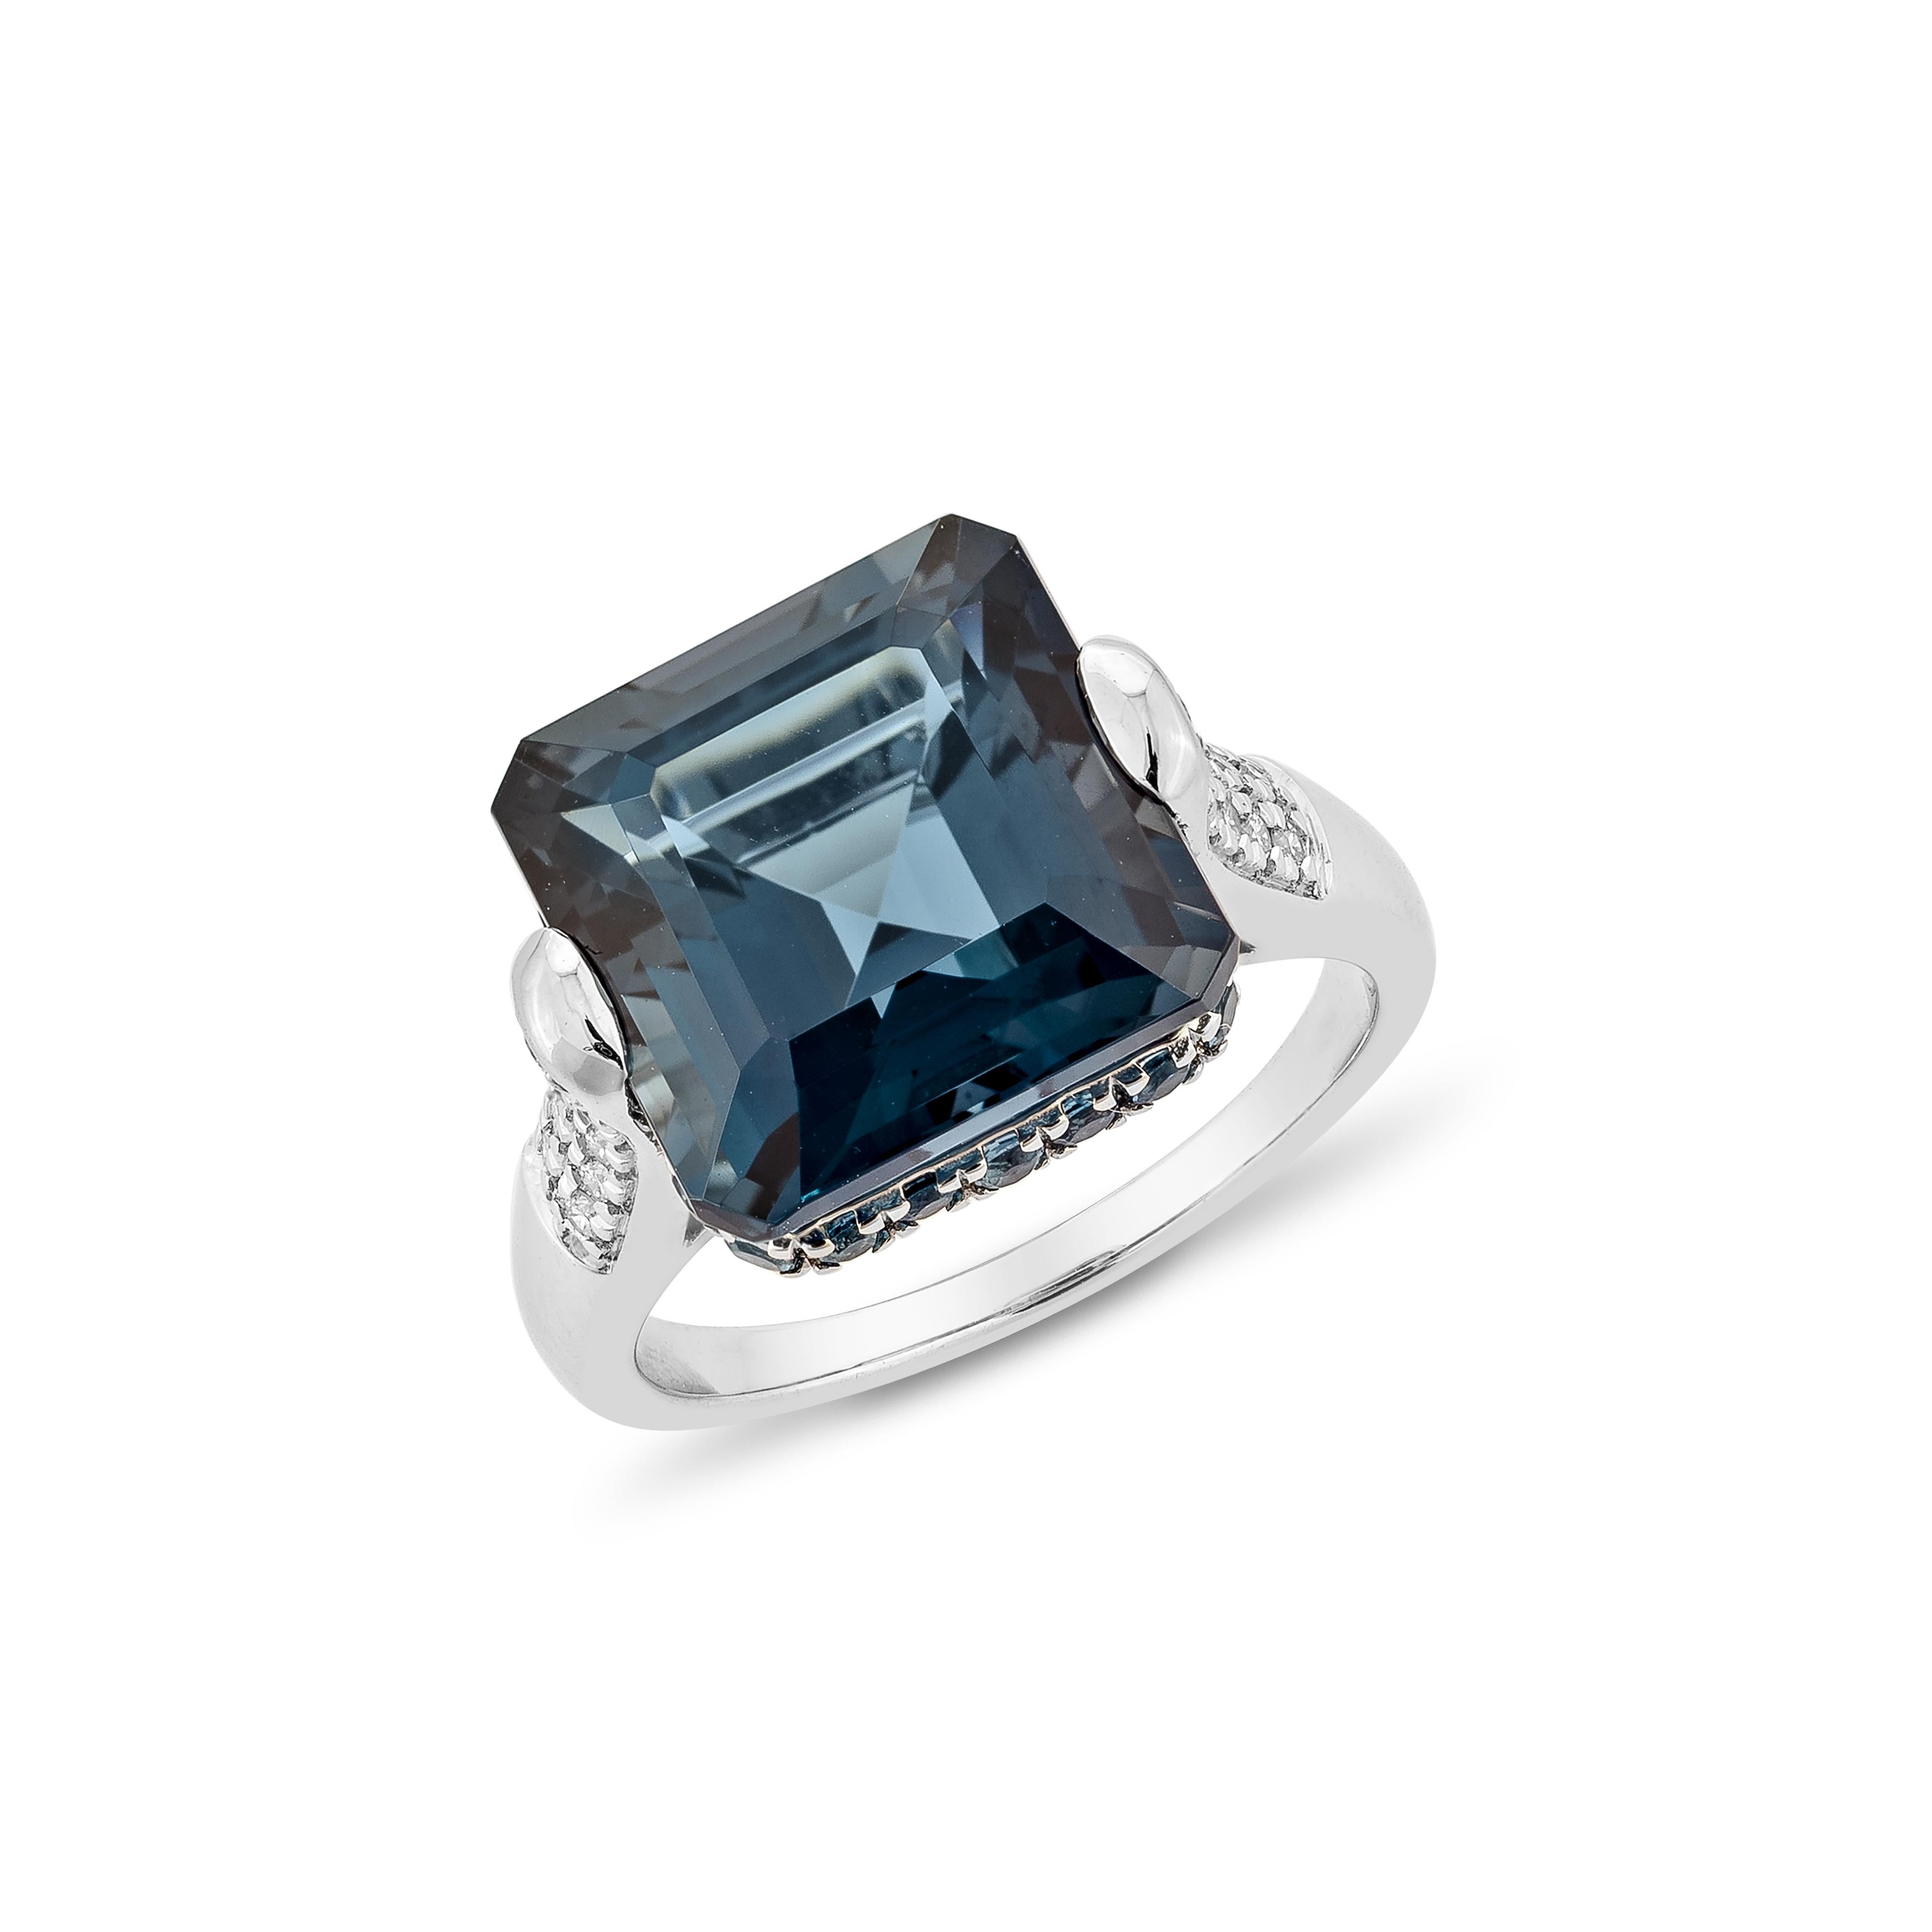 Contemporary 10.81 Carat London Blue Topaz Fancy Ring in 18KWG with White Diamond. For Sale